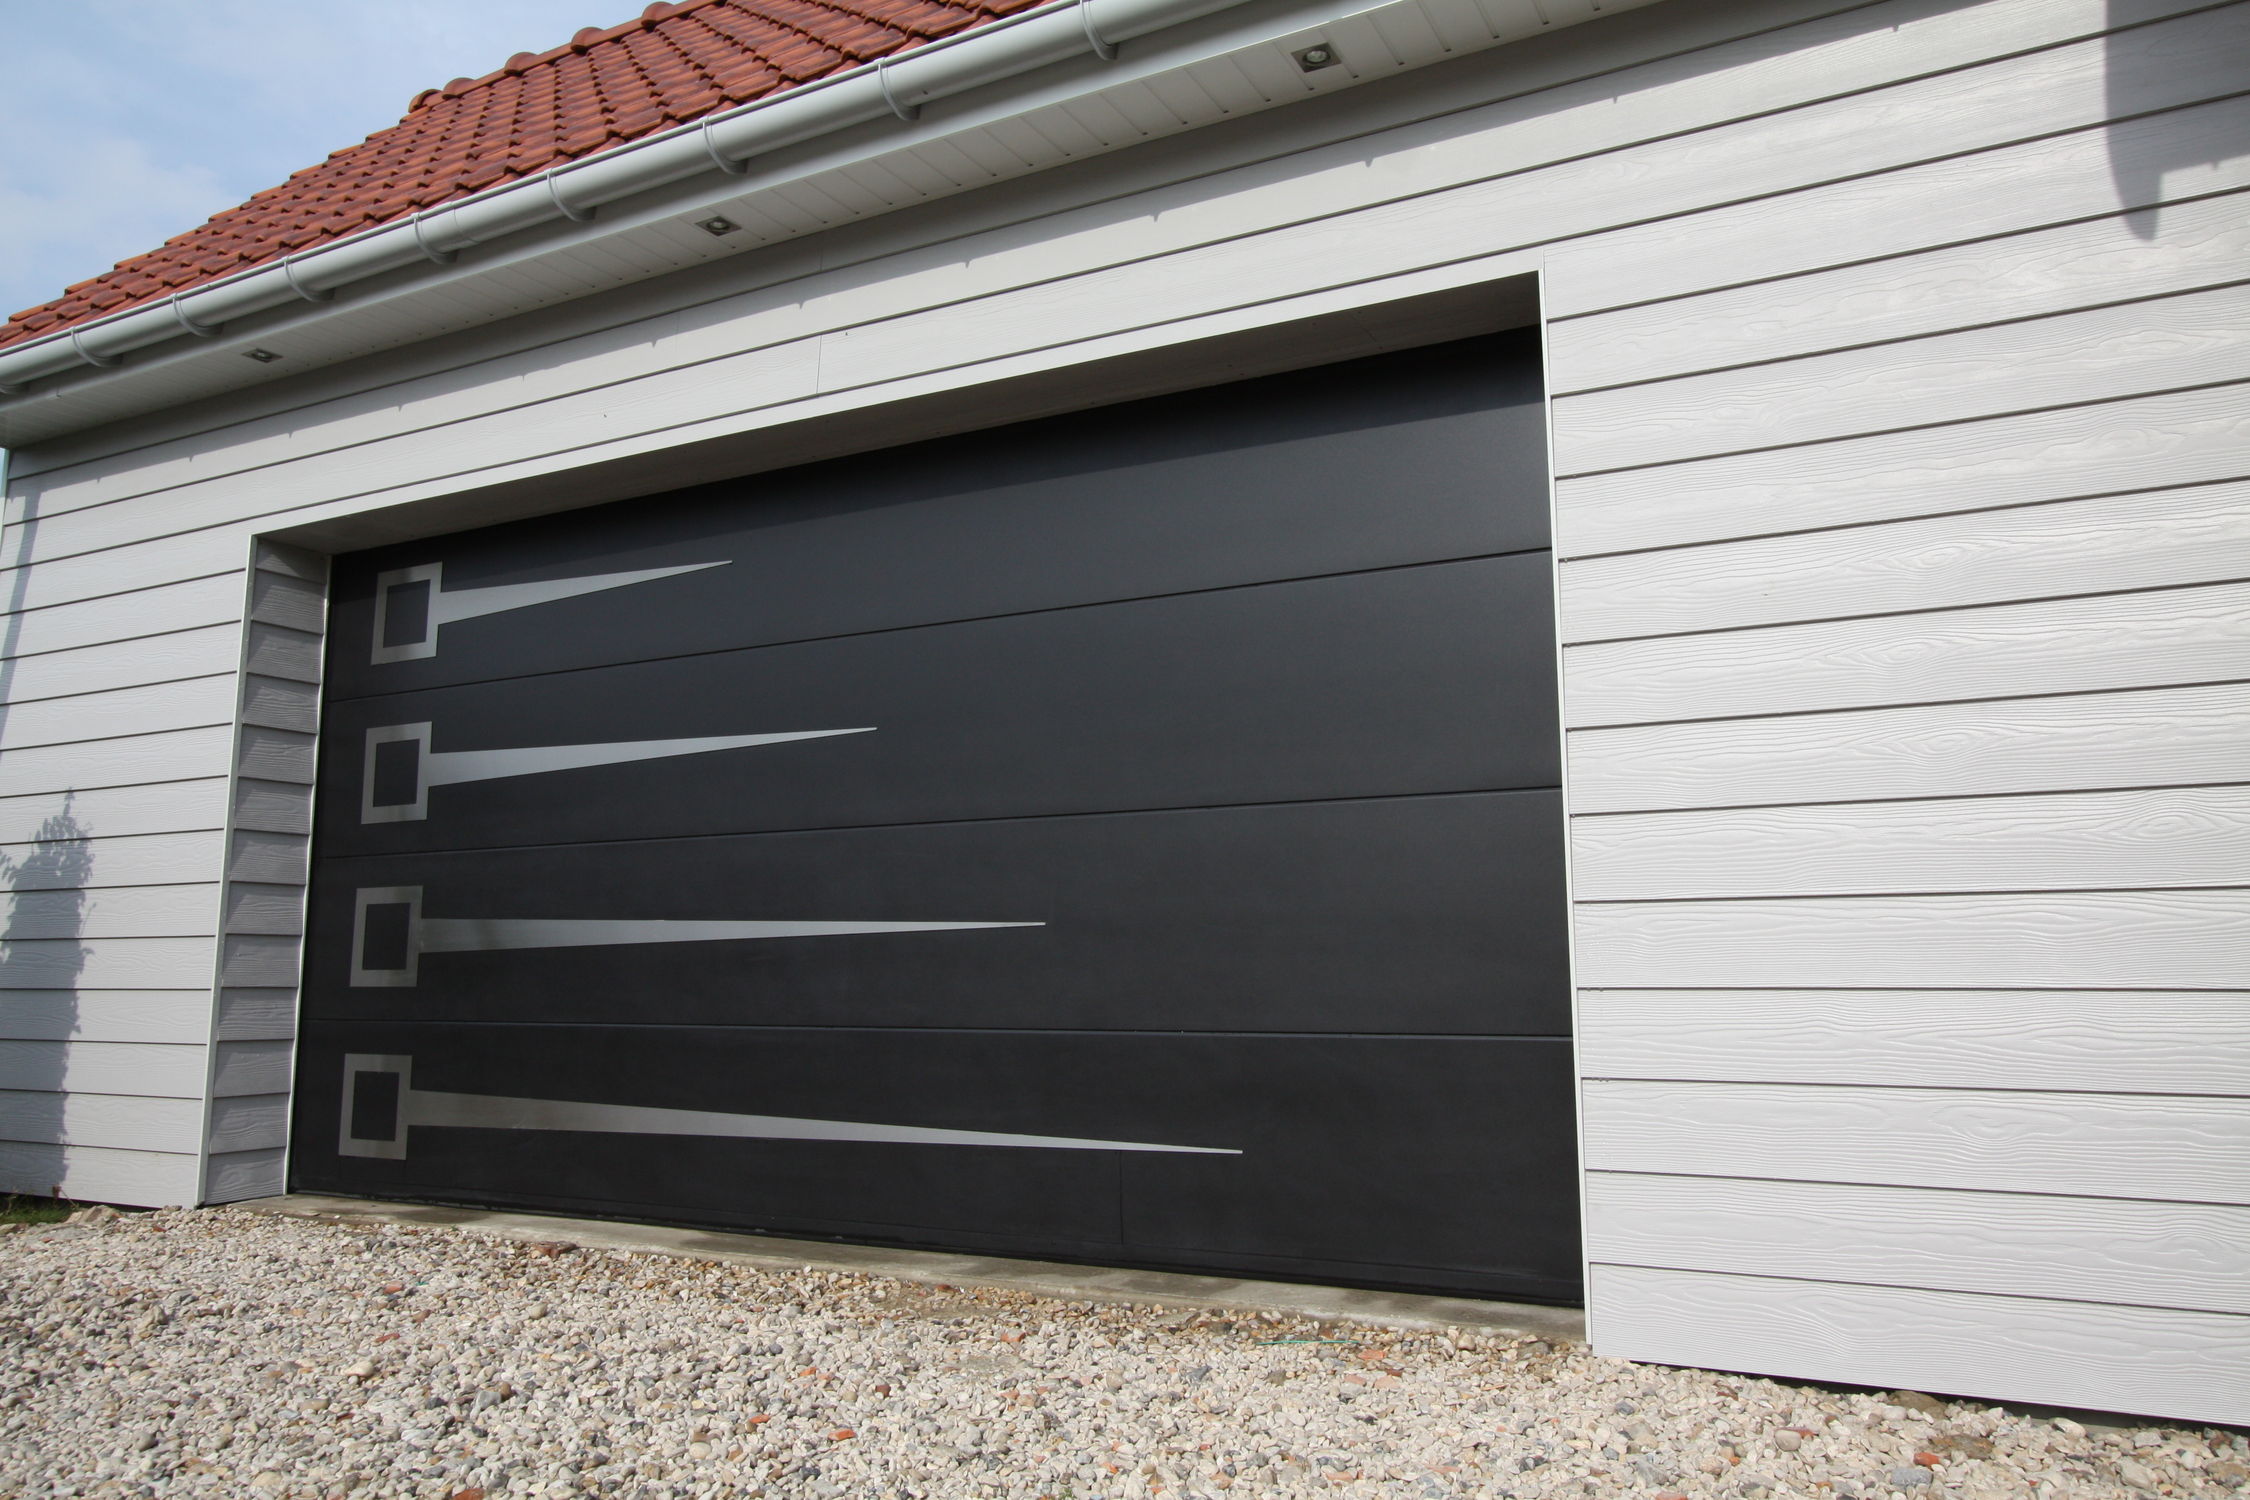 Cool Black Garage Aluminium Door Color For Sectional Garage Ideas With Best Fence Floor And Rooftop For Modern Architecture Home Inspiring Ideas Ideas